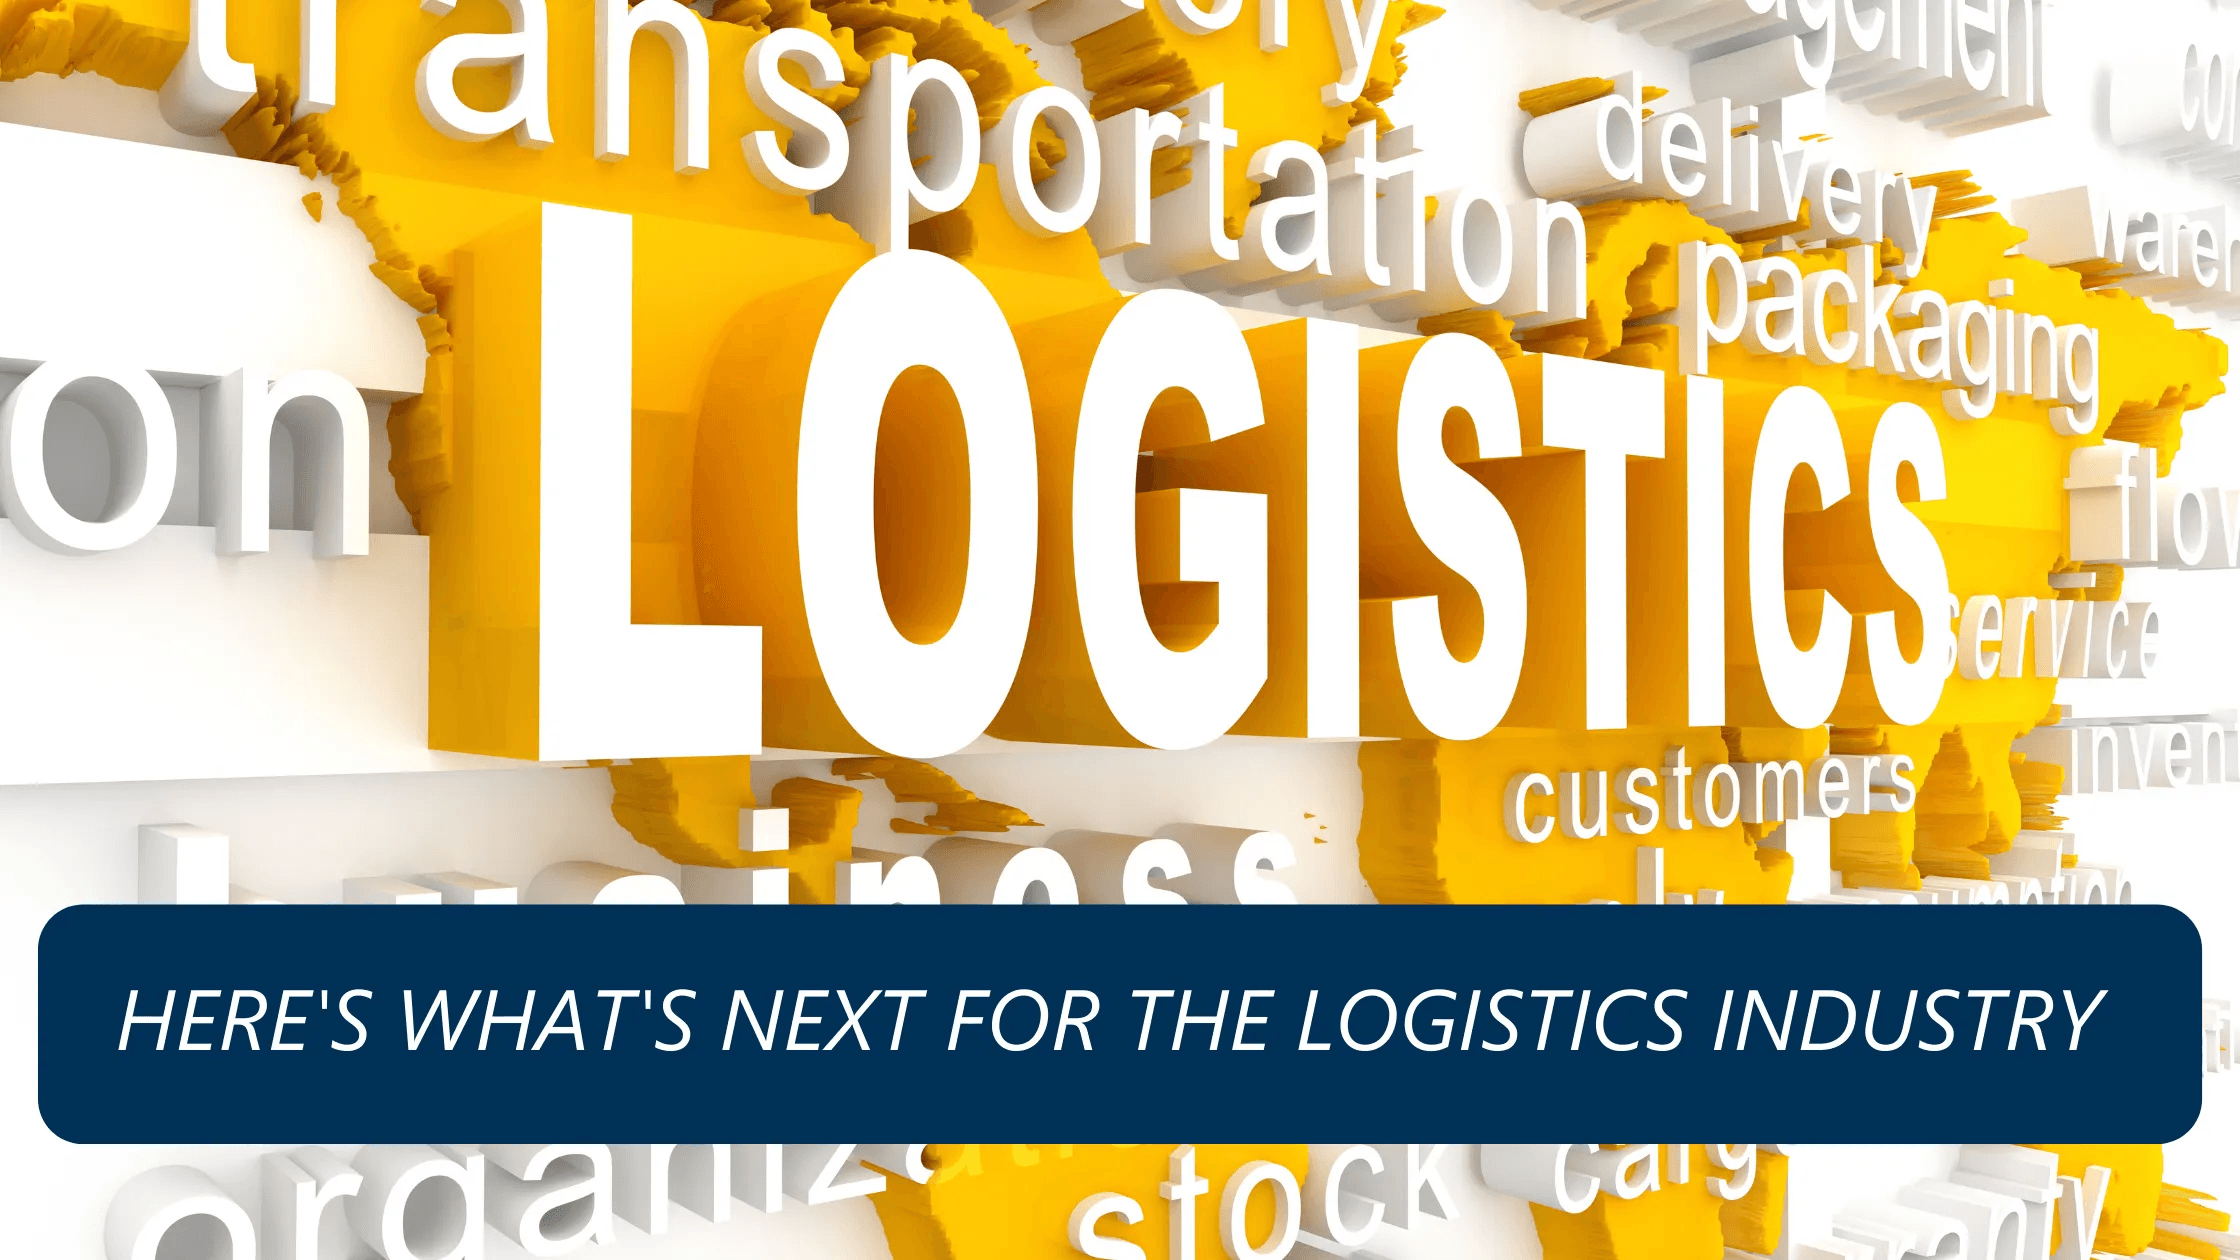 Words related to the Logistics industry, titled "Here's What's Next for the Logistics Industry"